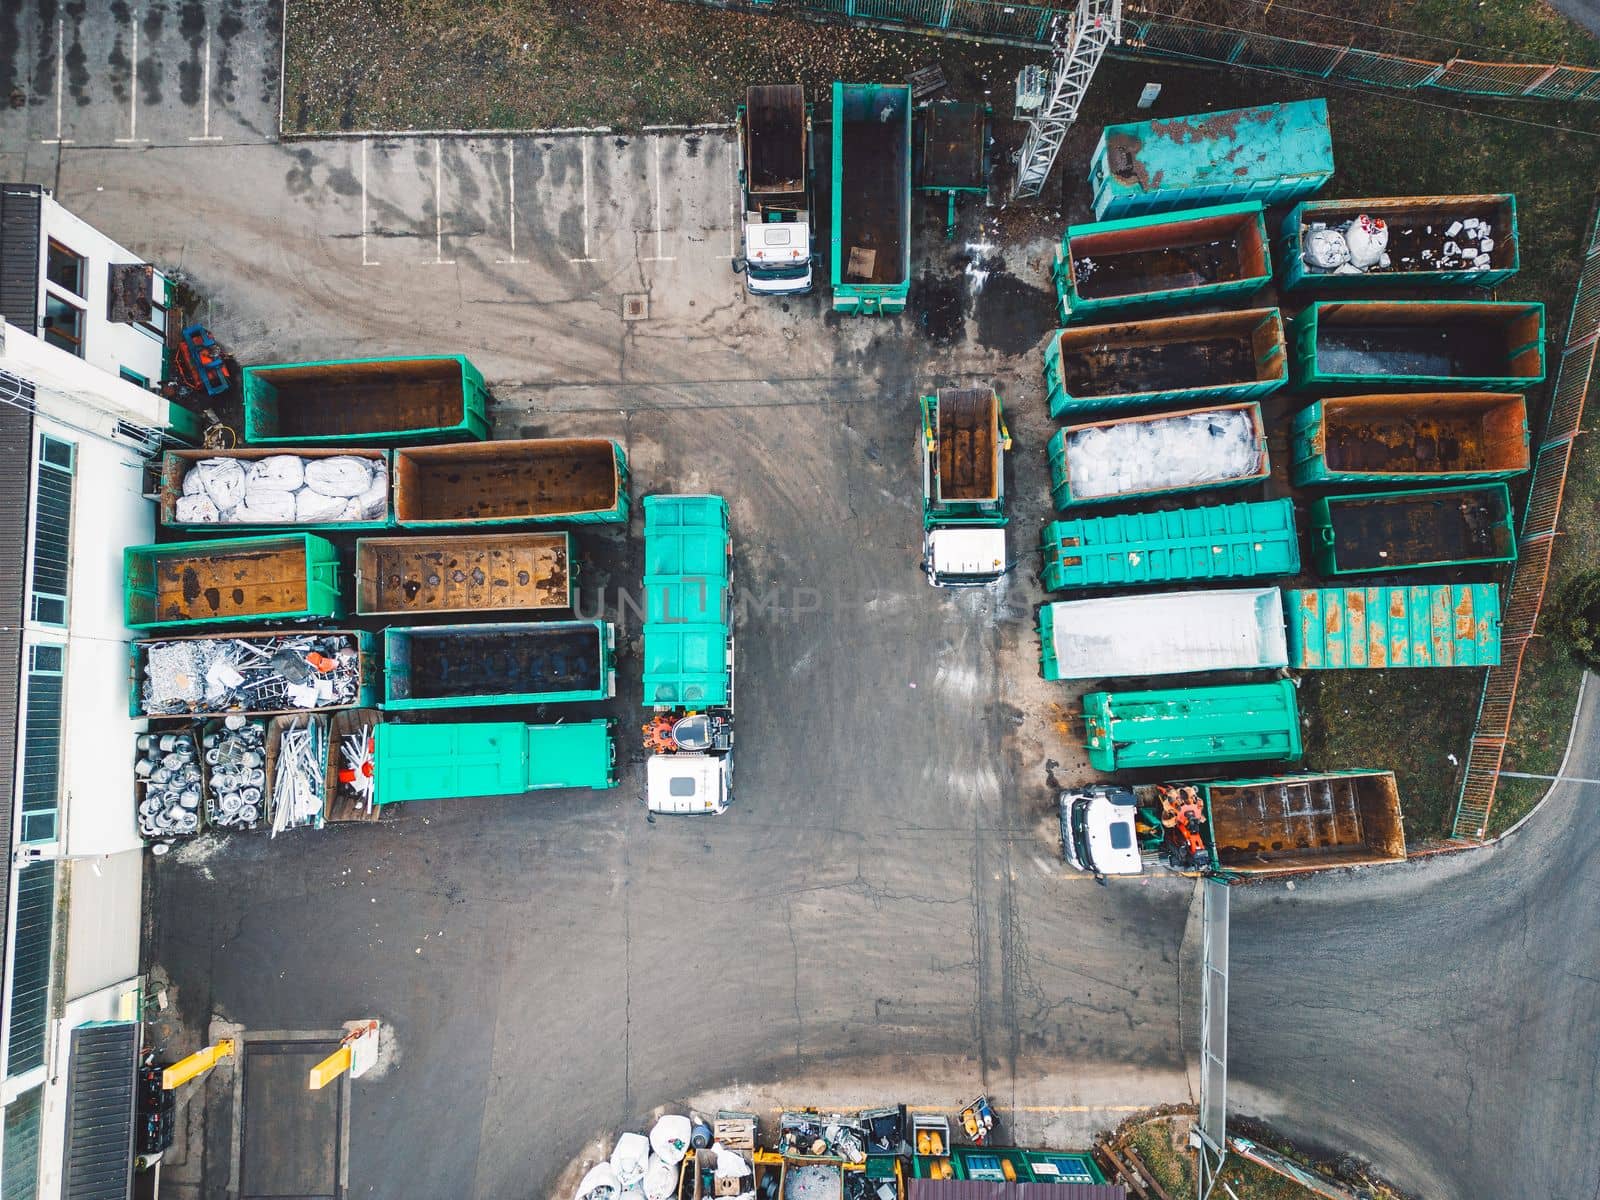 Aerial view, drone shoot of recycling center, containers for sorting out different garbage materials. Excess garbage problems. Reduce, reuse, recycle.